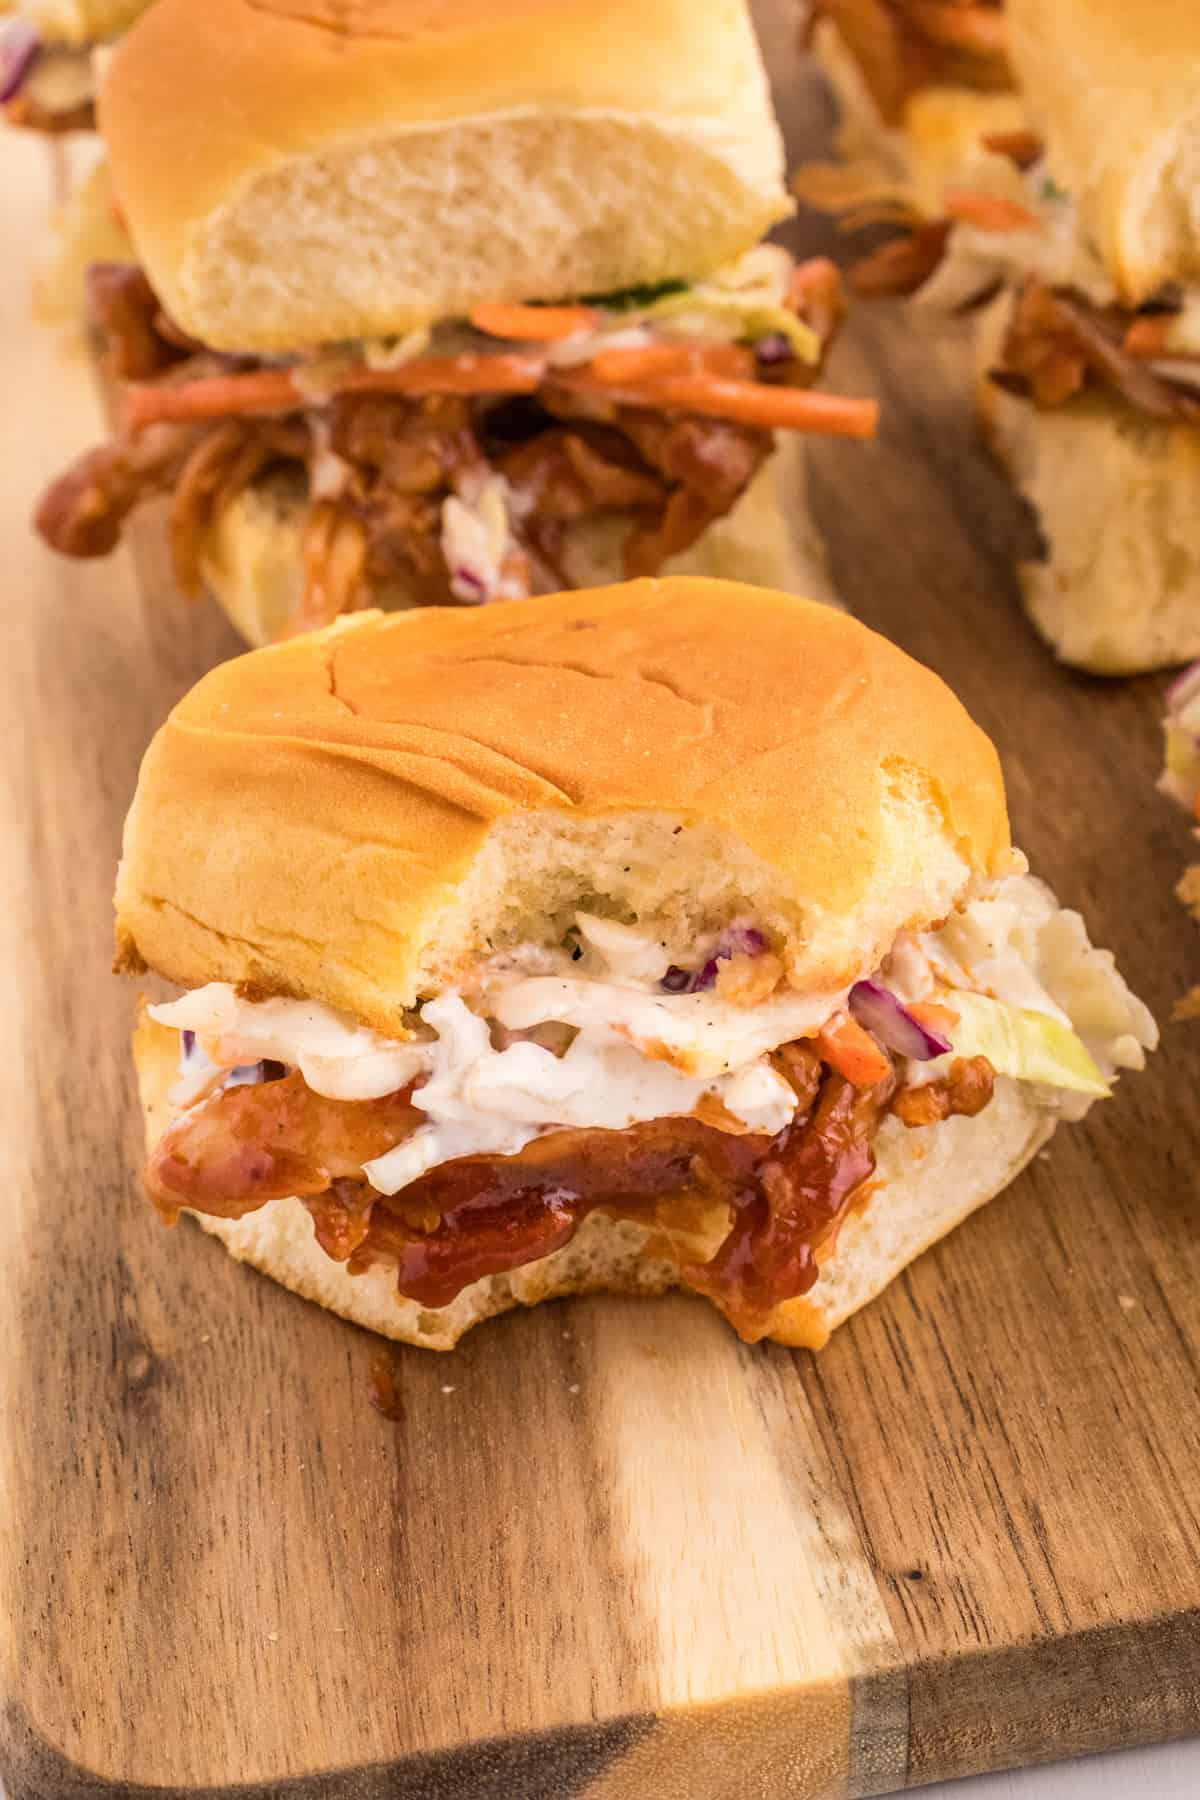 BBQ pulled pork sliders on a wooden cutting board.